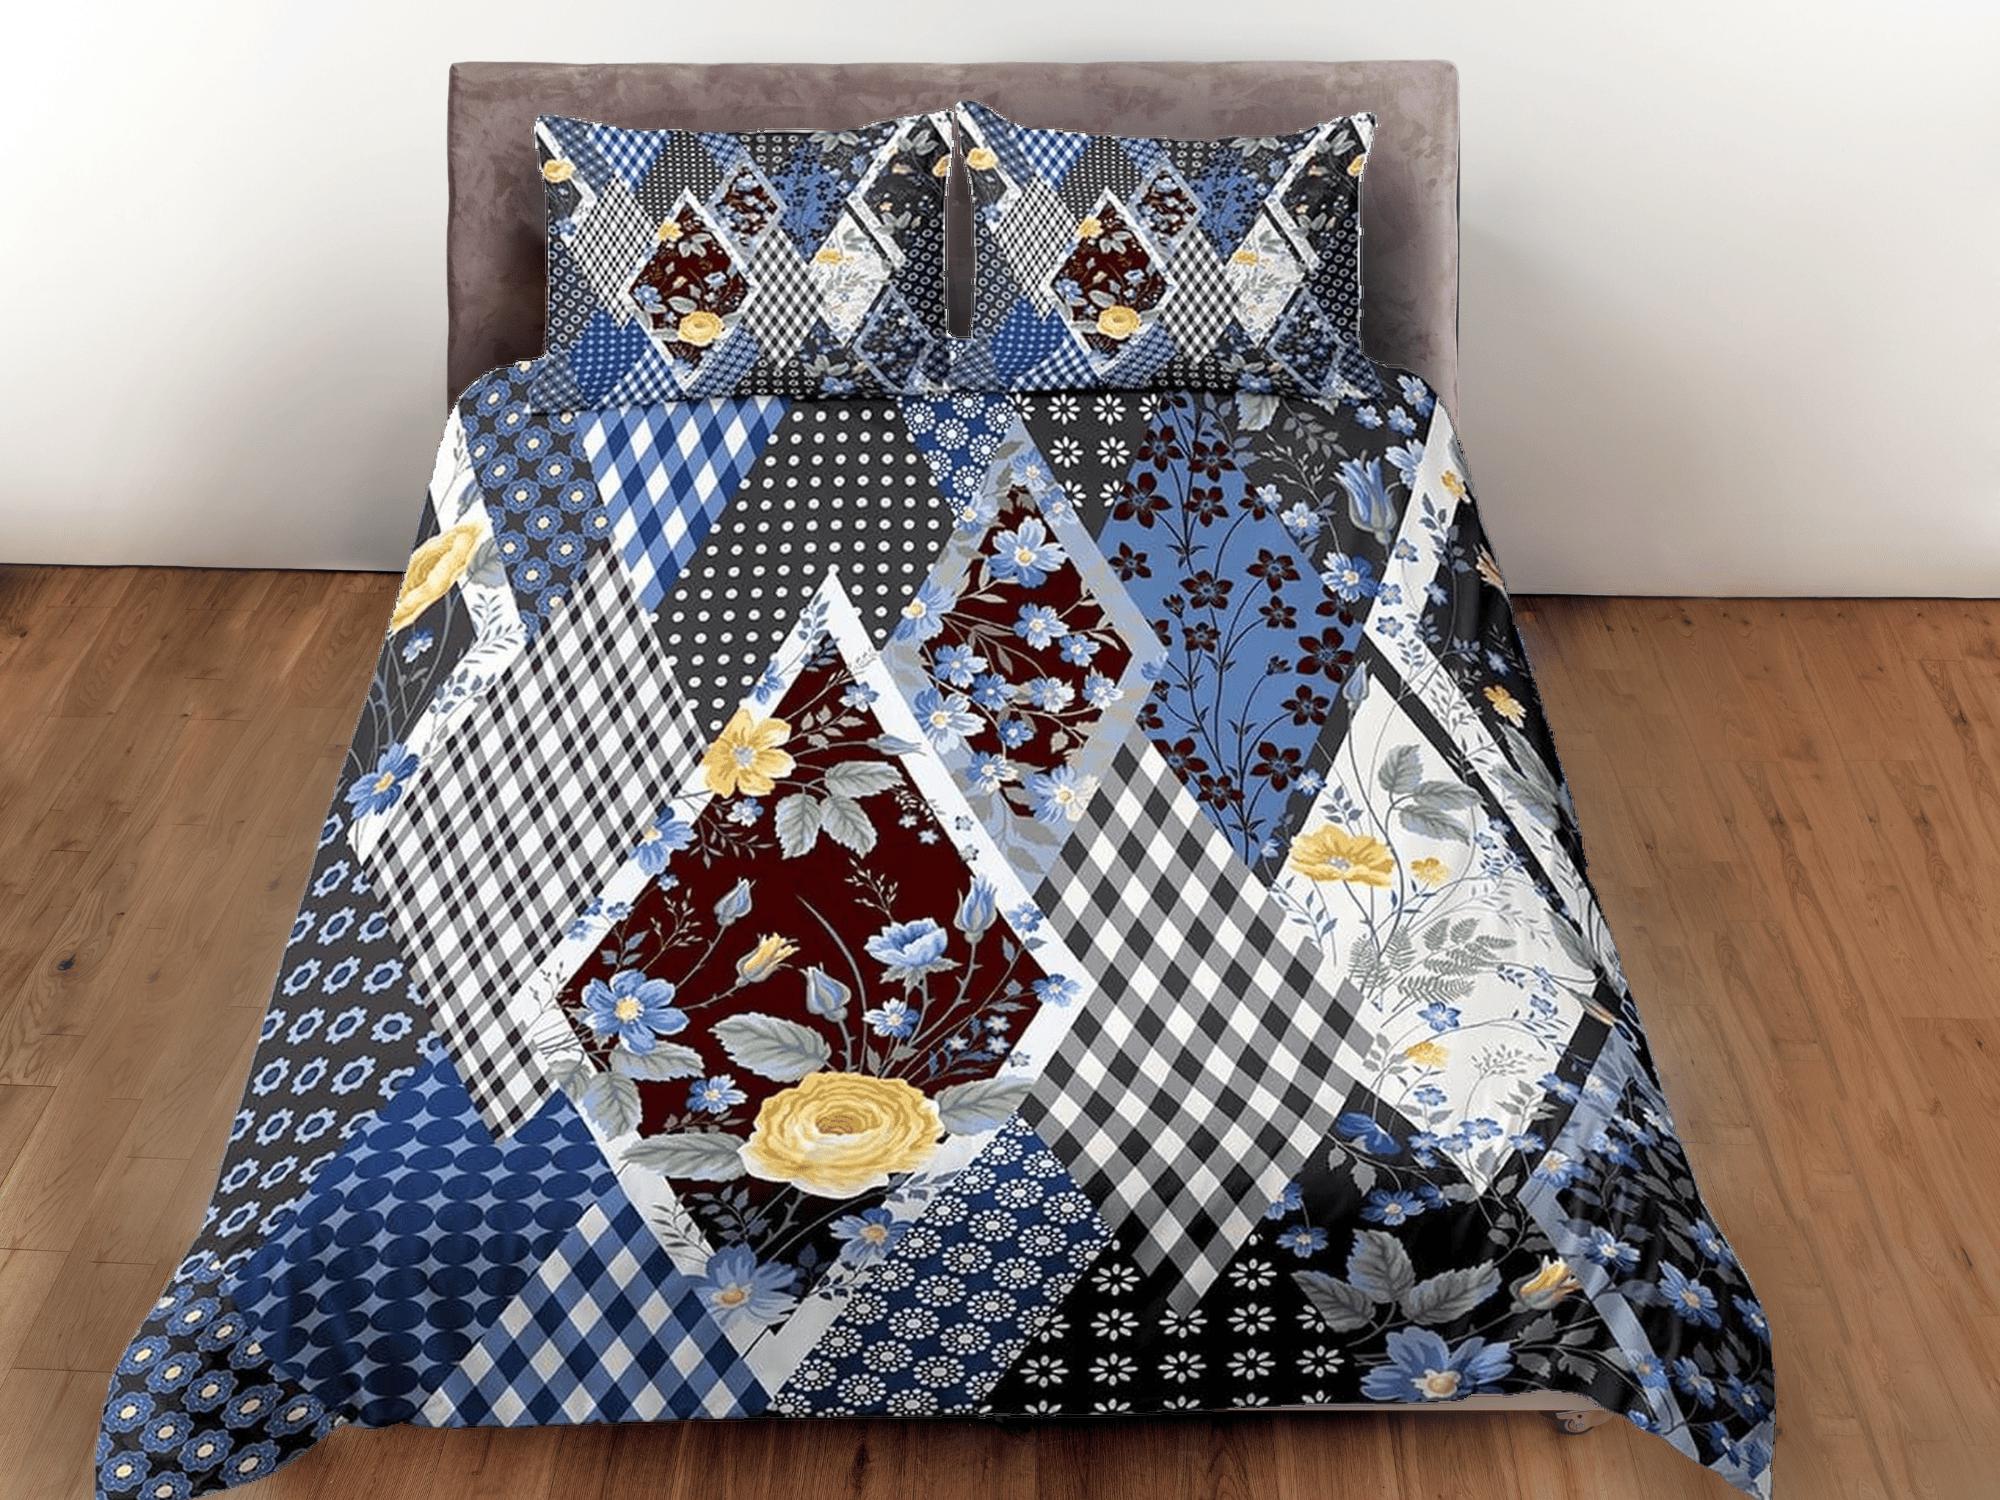 daintyduvet Blue floral and plaid patchwork quilt printed duvet cover set, aesthetic room bedding set full, king, queen size, boho bedspread shabby chic